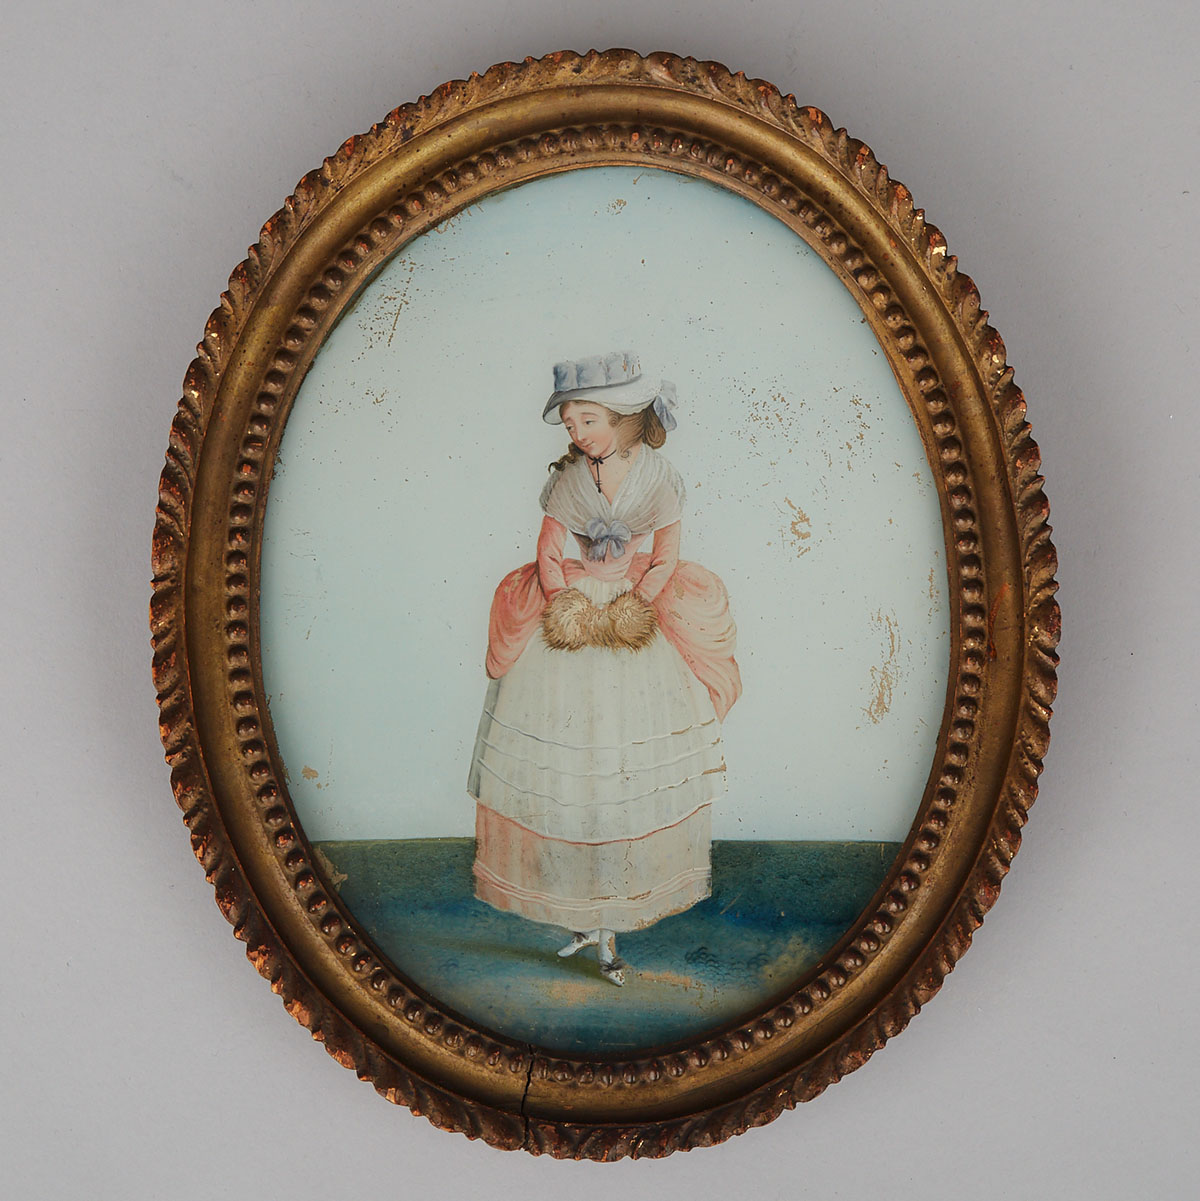 Late Georgian Reverse Painting on Glass of a Young Woman, early 19th century